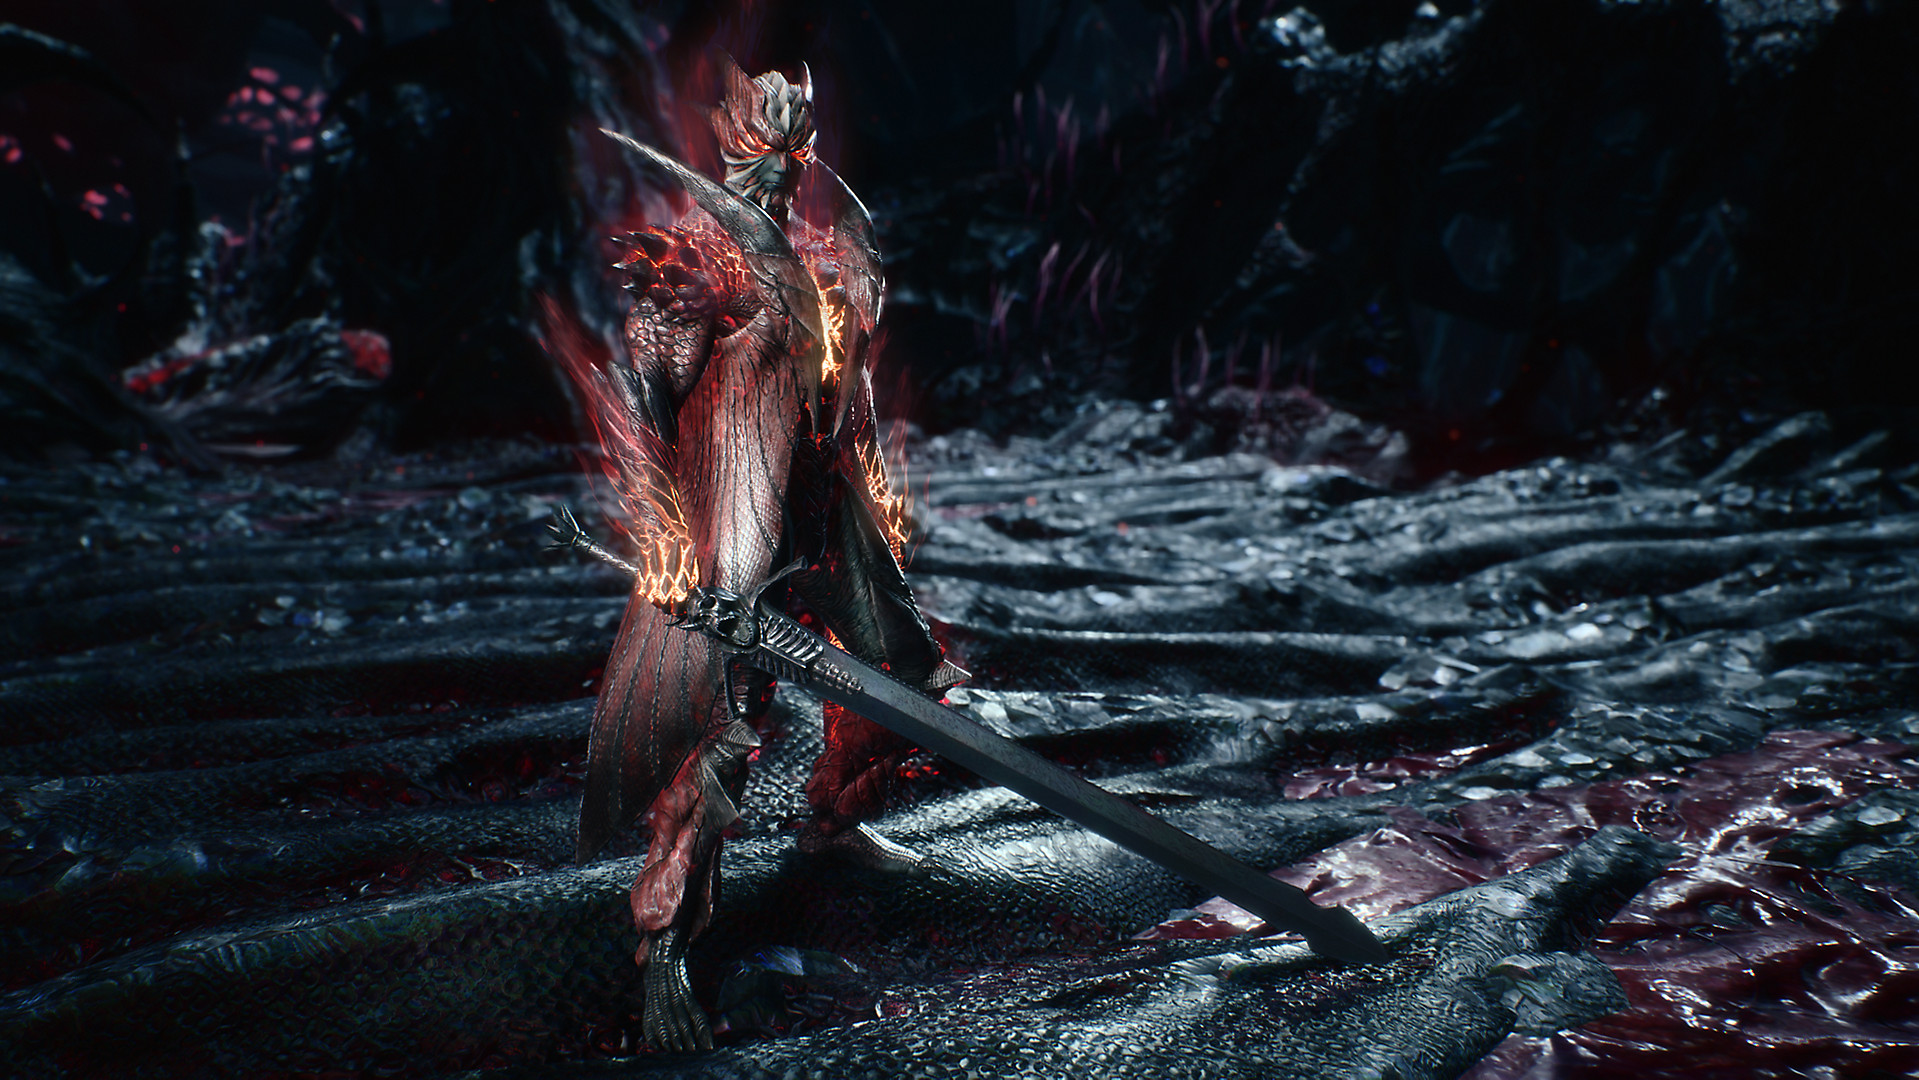 Media asset in full size related to 3dfxzone.it news item entitled as follows: Capcom pubblica il trailer in 4K di Devil May Cry 5 a pochi giorni dal lancio | Image Name: news29318_Devil-May-Cry-5-Screenshot_4.jpg